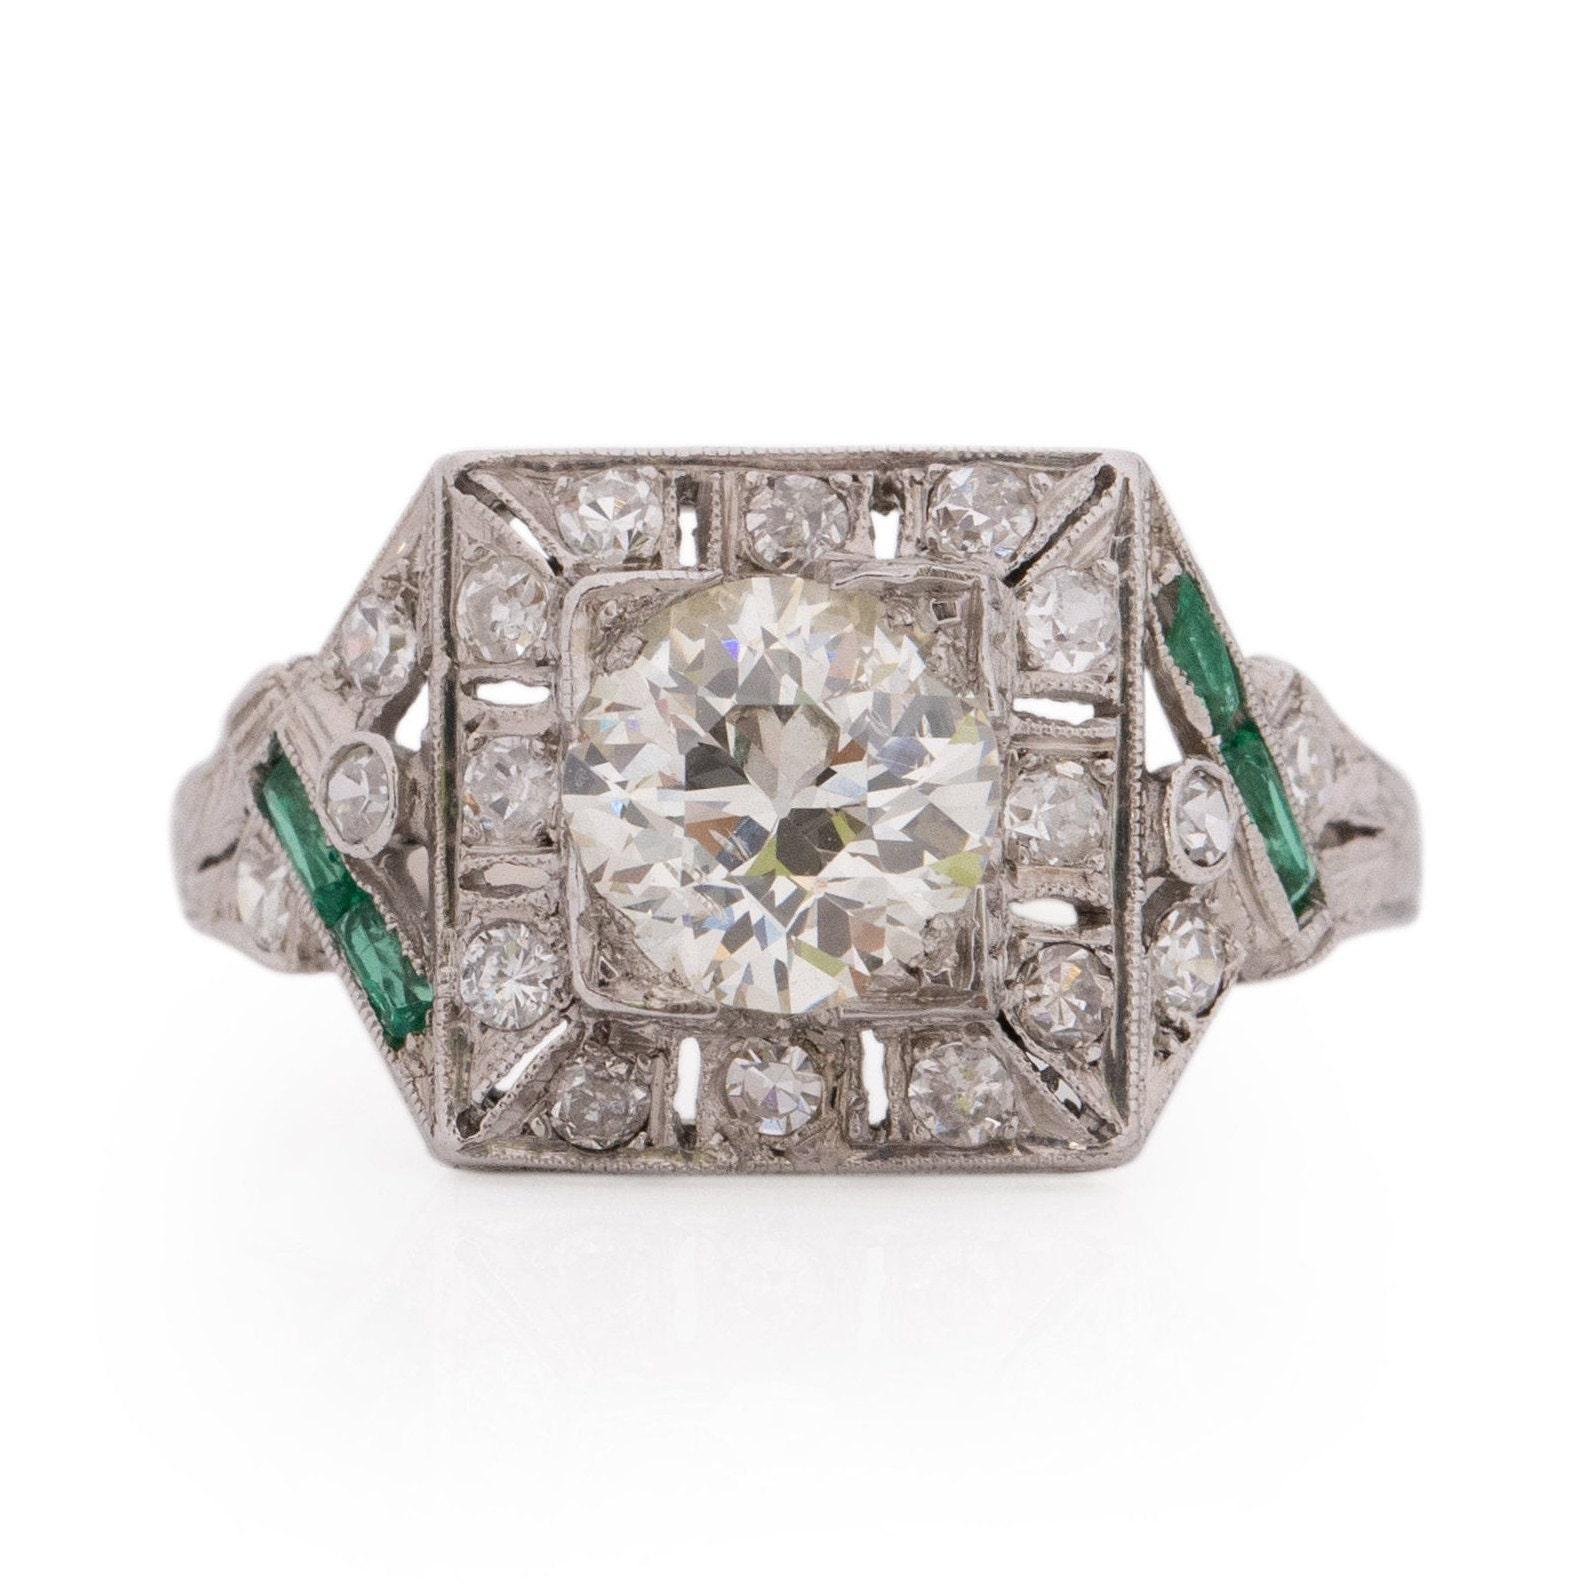 Fit for royalty, this exquisite Art Deco piece is a true masterpiece. With filigree detailing gracing the shanks and a magnificent 1.26 Ct center diamond, this ring is a testament to artistry. Every element harmonizes seamlessly to create a truly